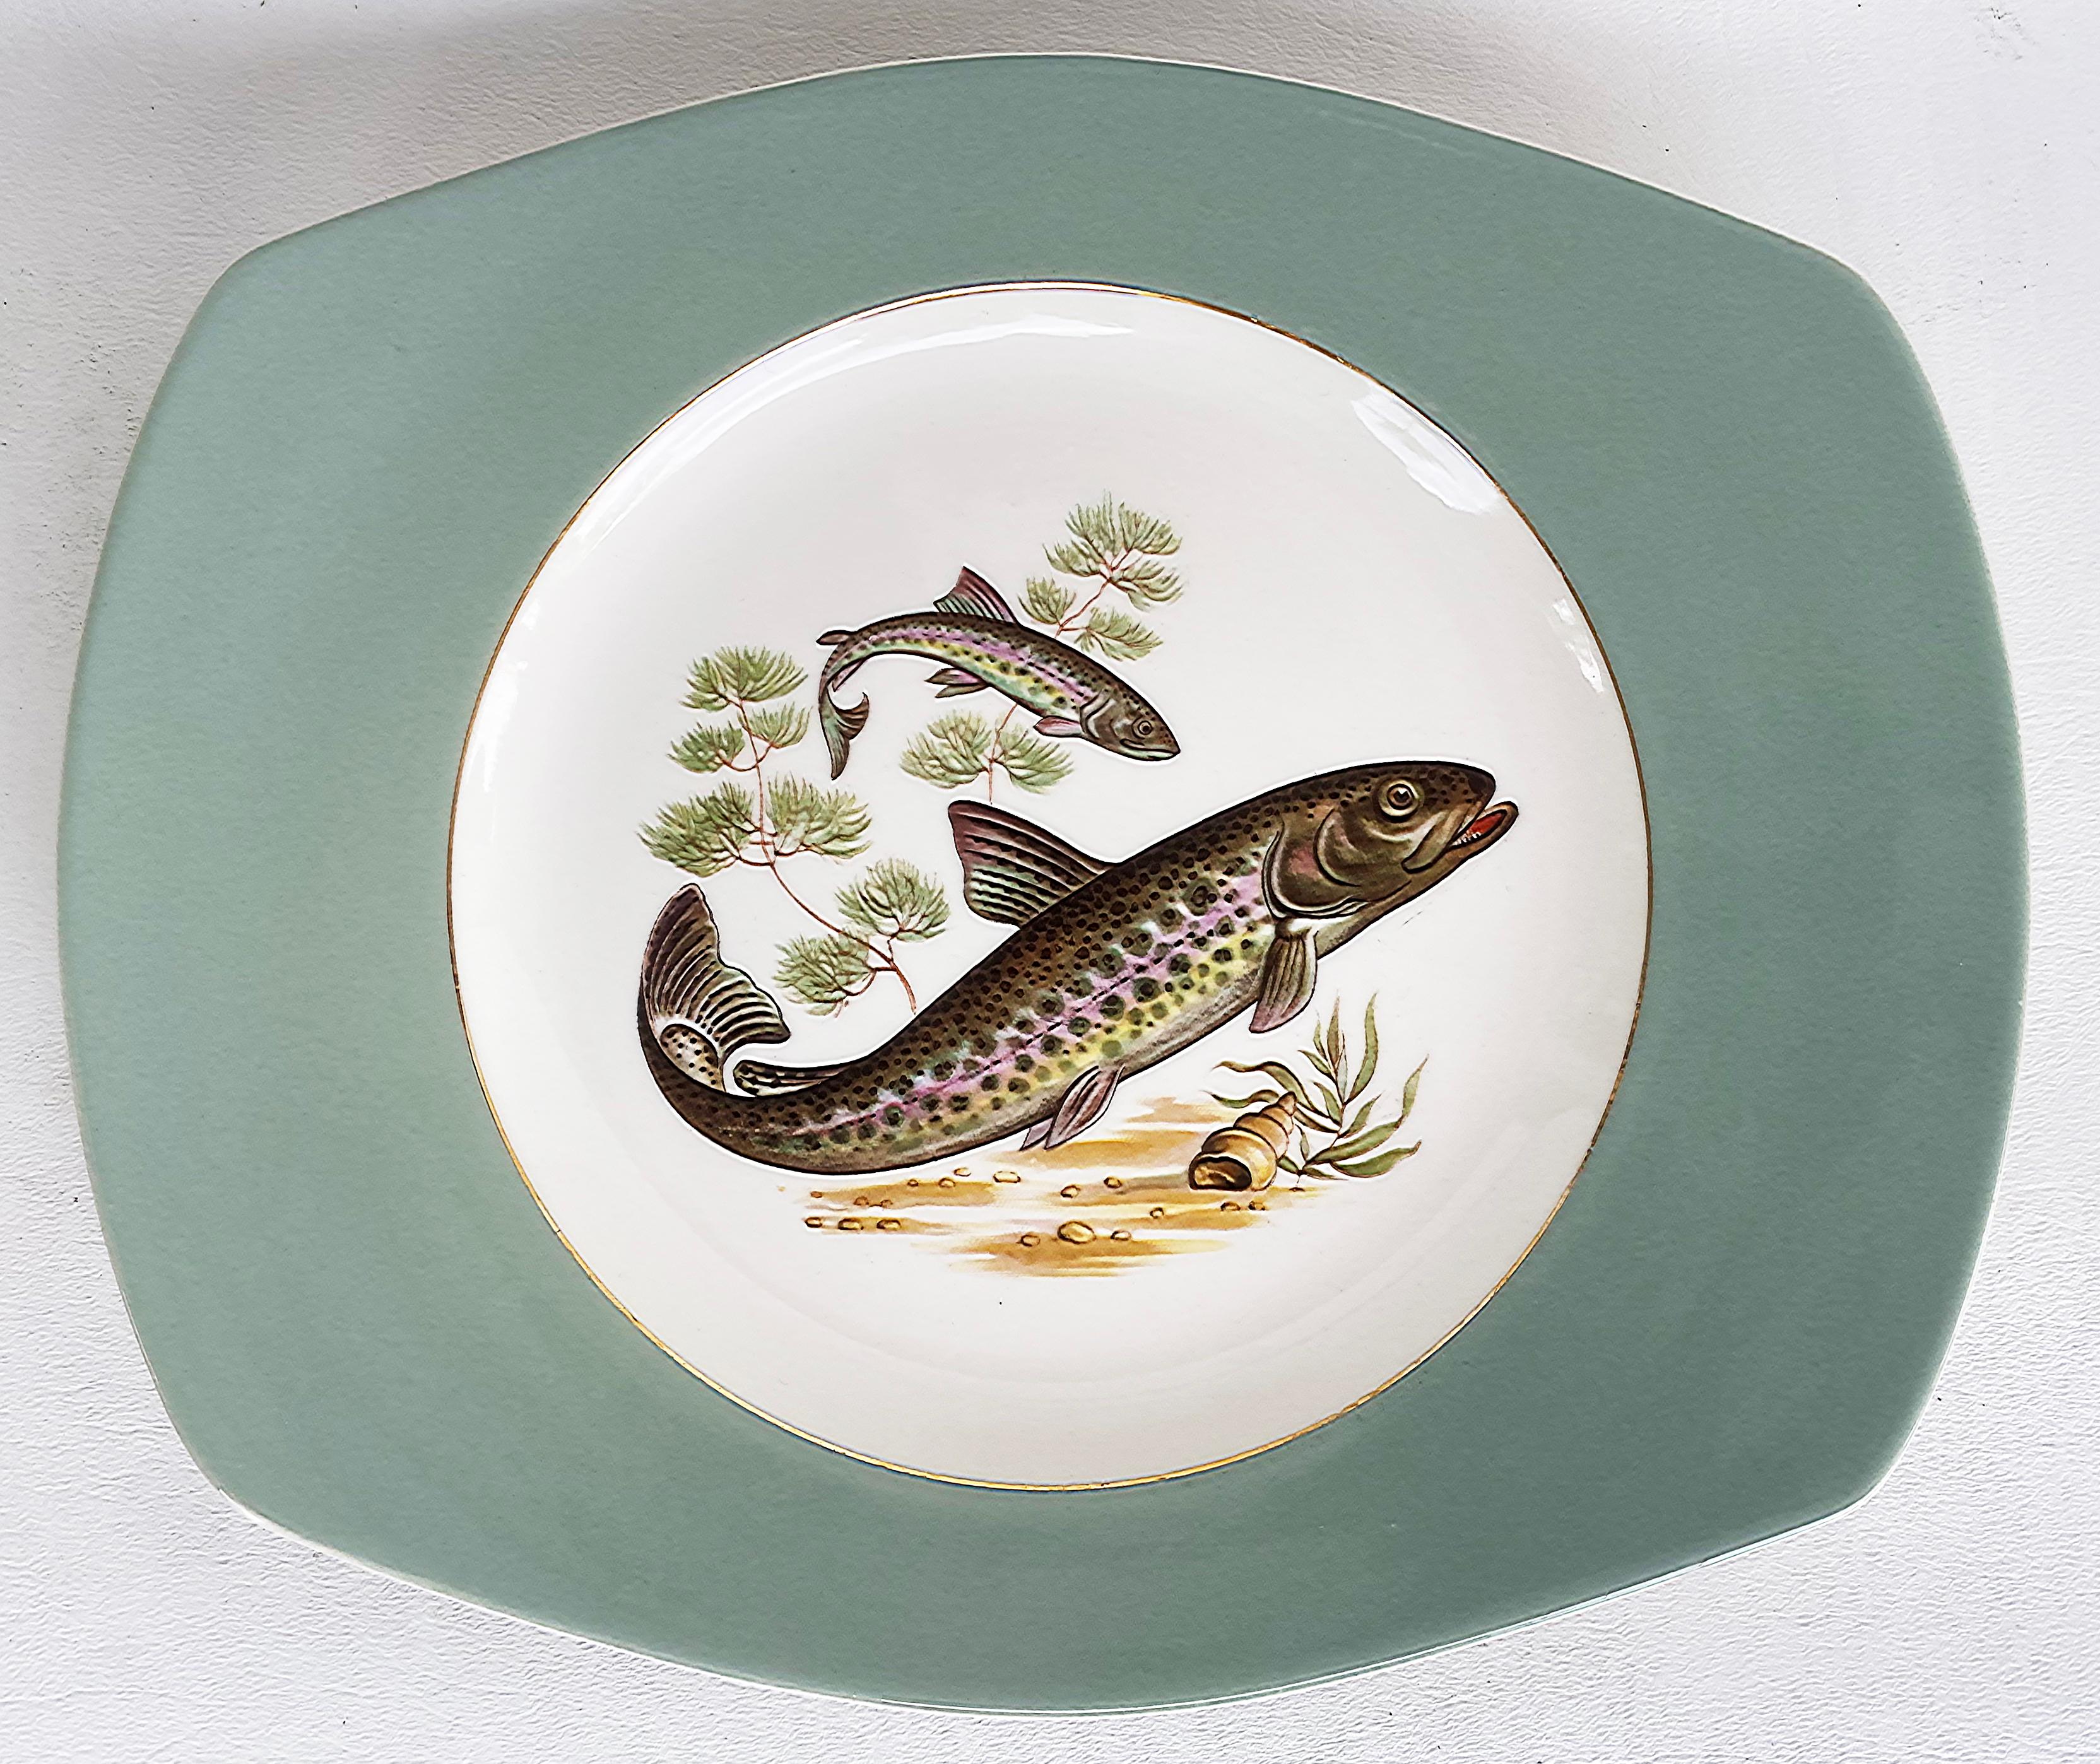 Figgjo Flint Norwegian Fish Service, Platter and 12 Plates, Mid-20th C

Offered for sale is a set of 12 dining plates and a companion serving platter with fish motifs on all. The set is Norwegian and manufactured by Figgo Flint.  The plates and the